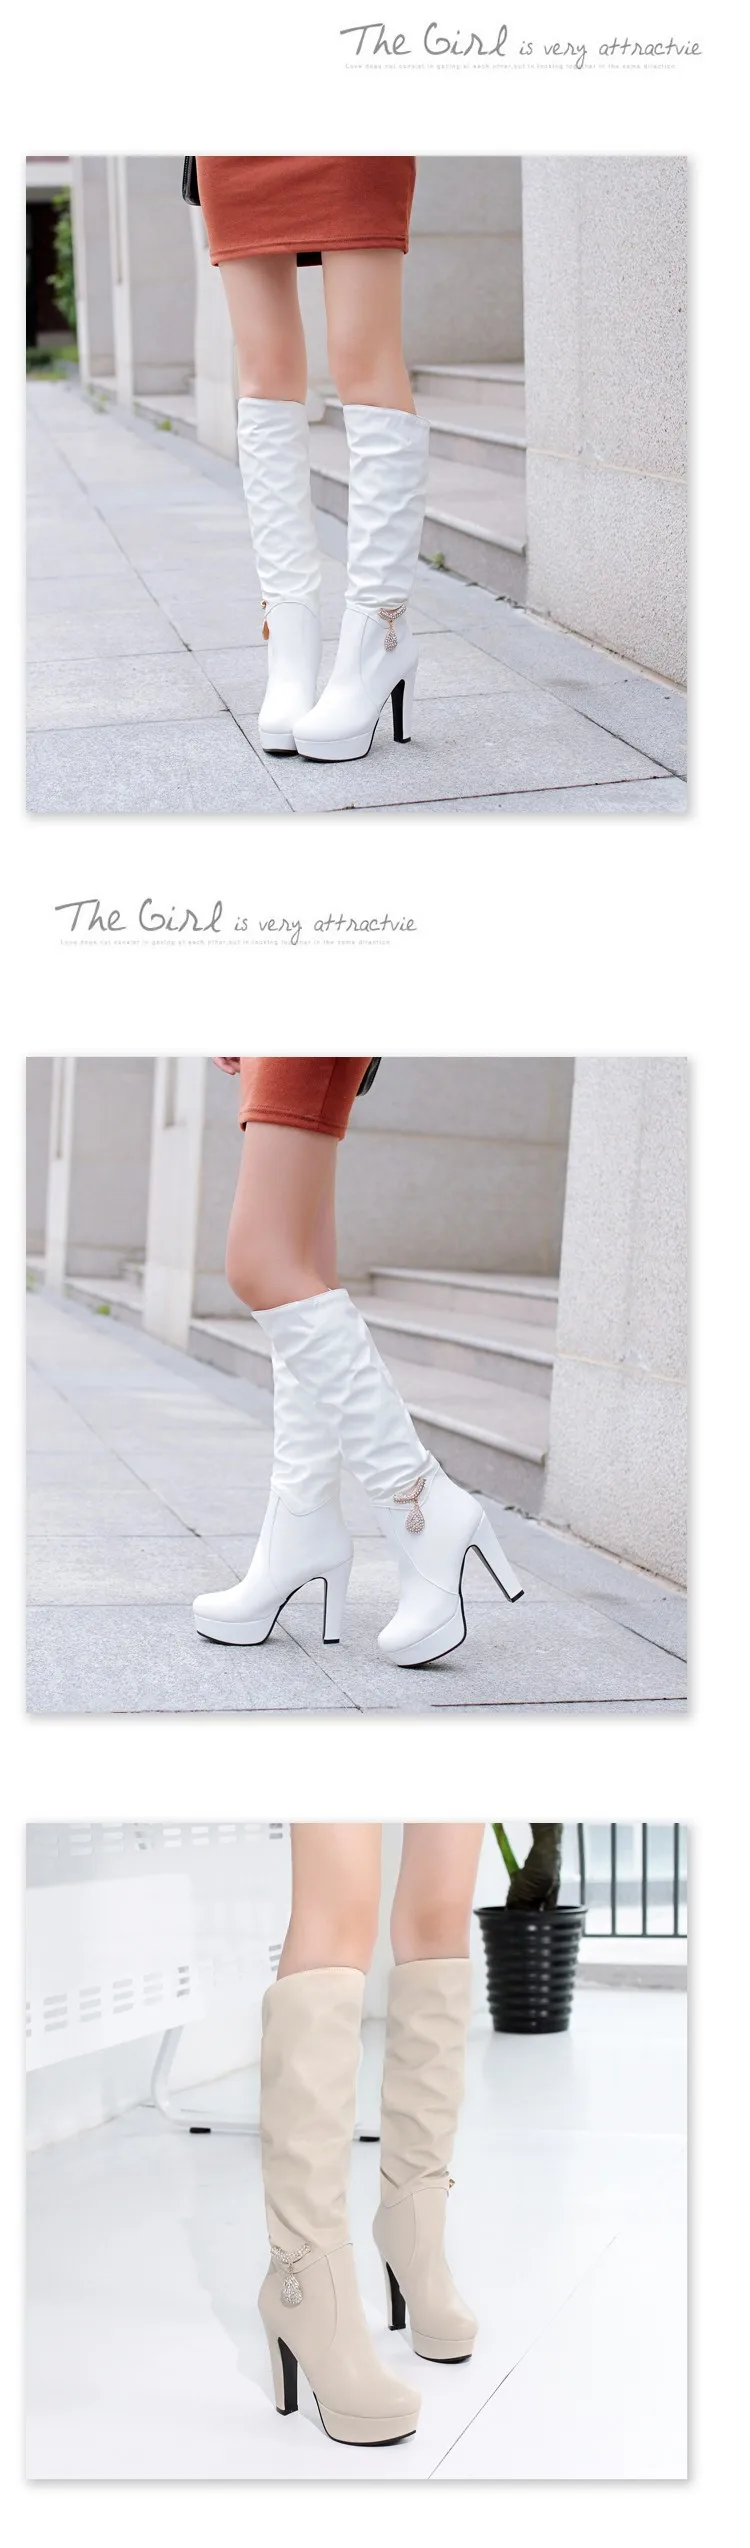 Promotion winter Minimalism High cylinder boots High-heeled Waterproof Korean Edition fashion white Women Boots plus size 34-43